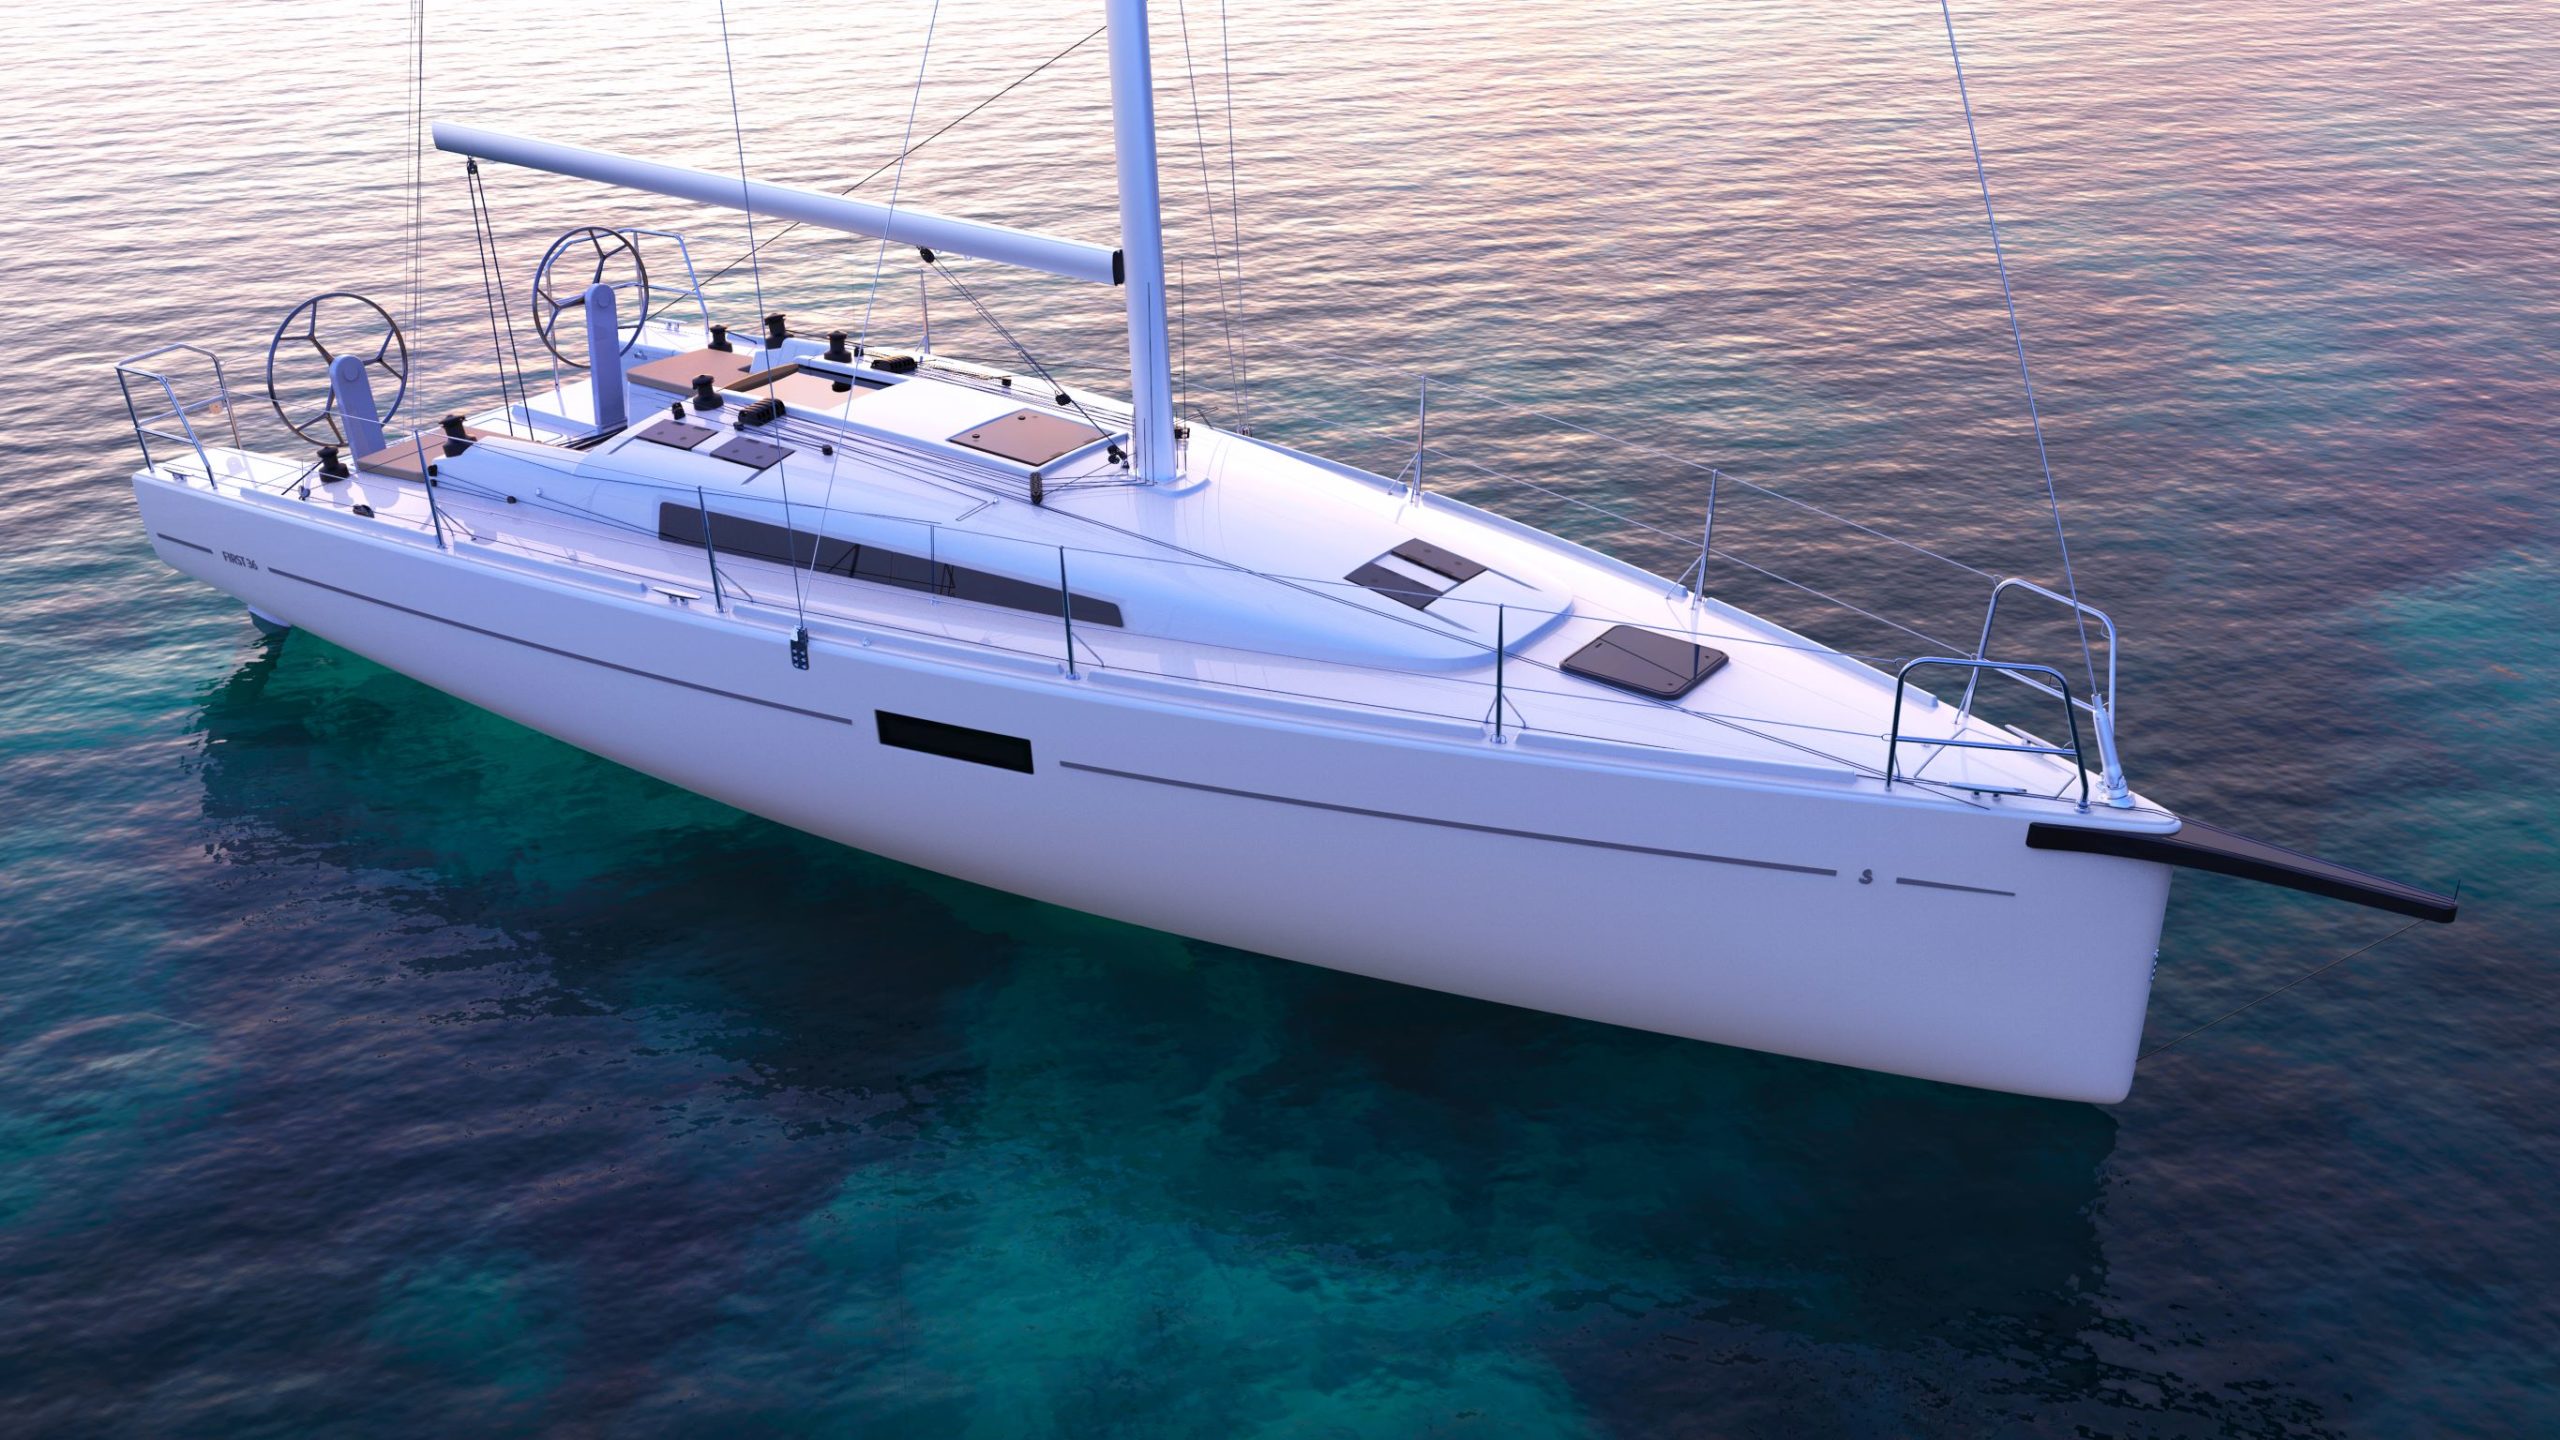 Beneteau FIRST 36 profile drawing